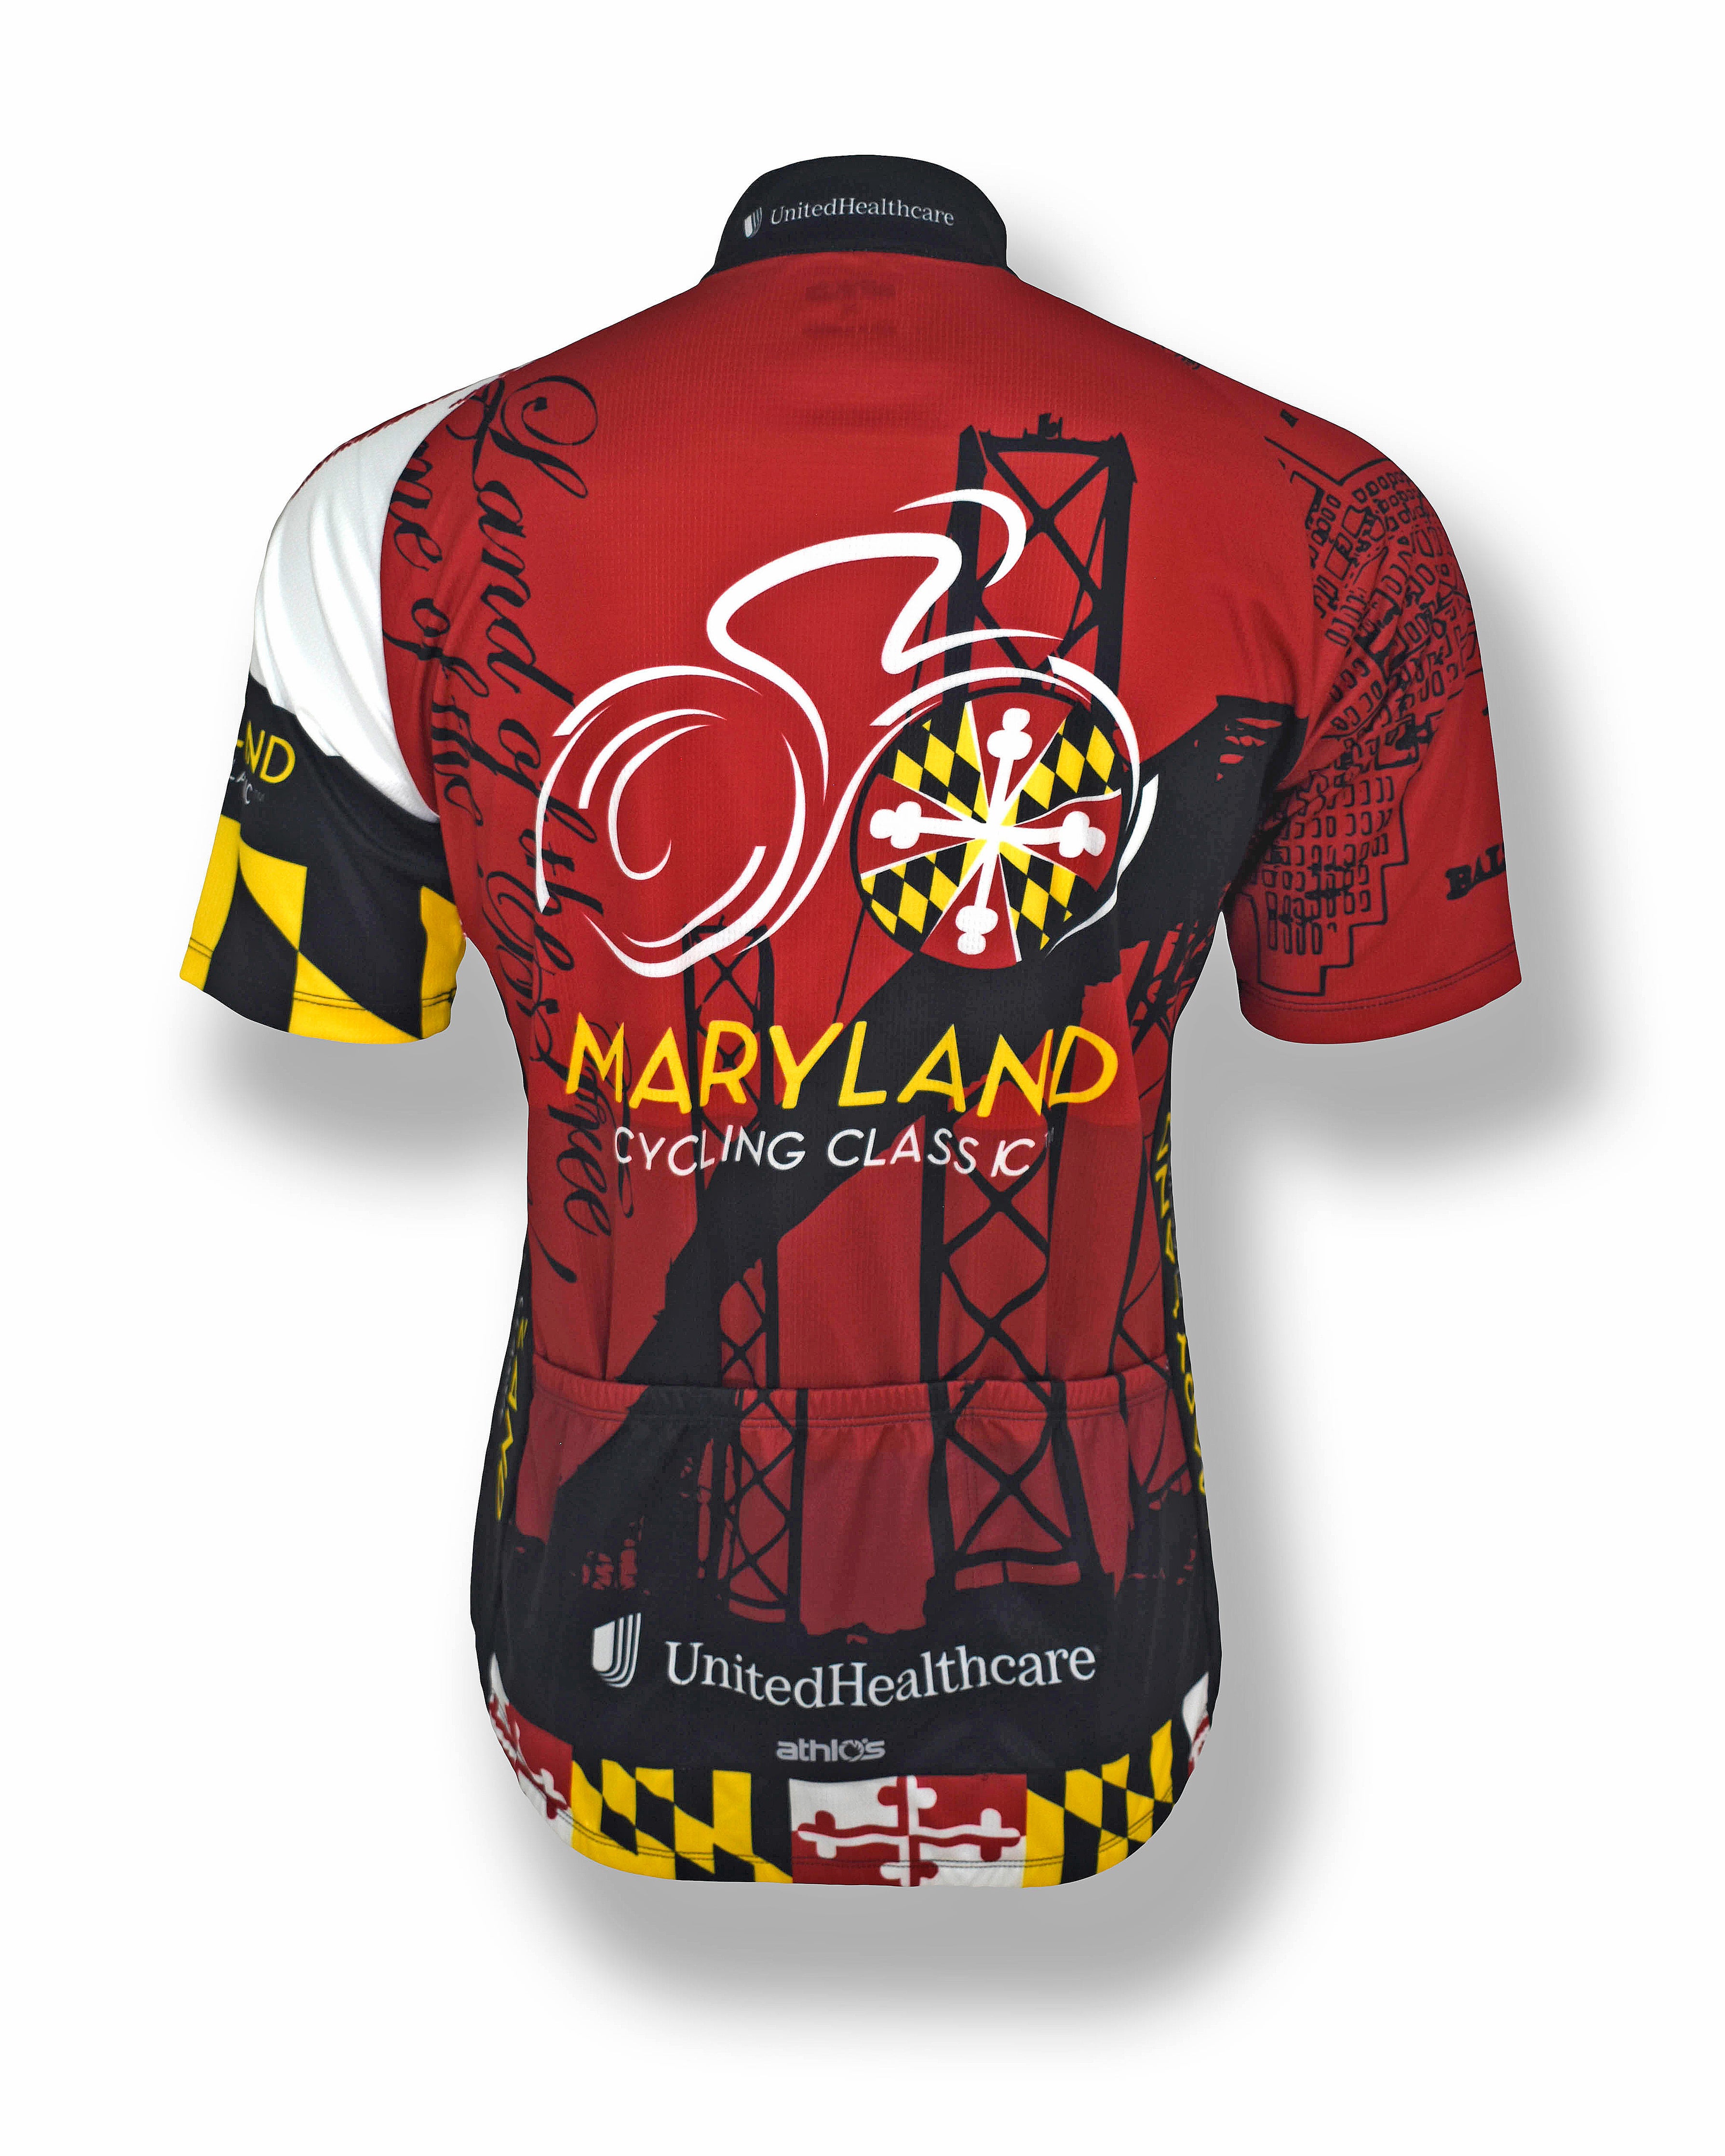 OLD BAY® Men's Cycling Jersey